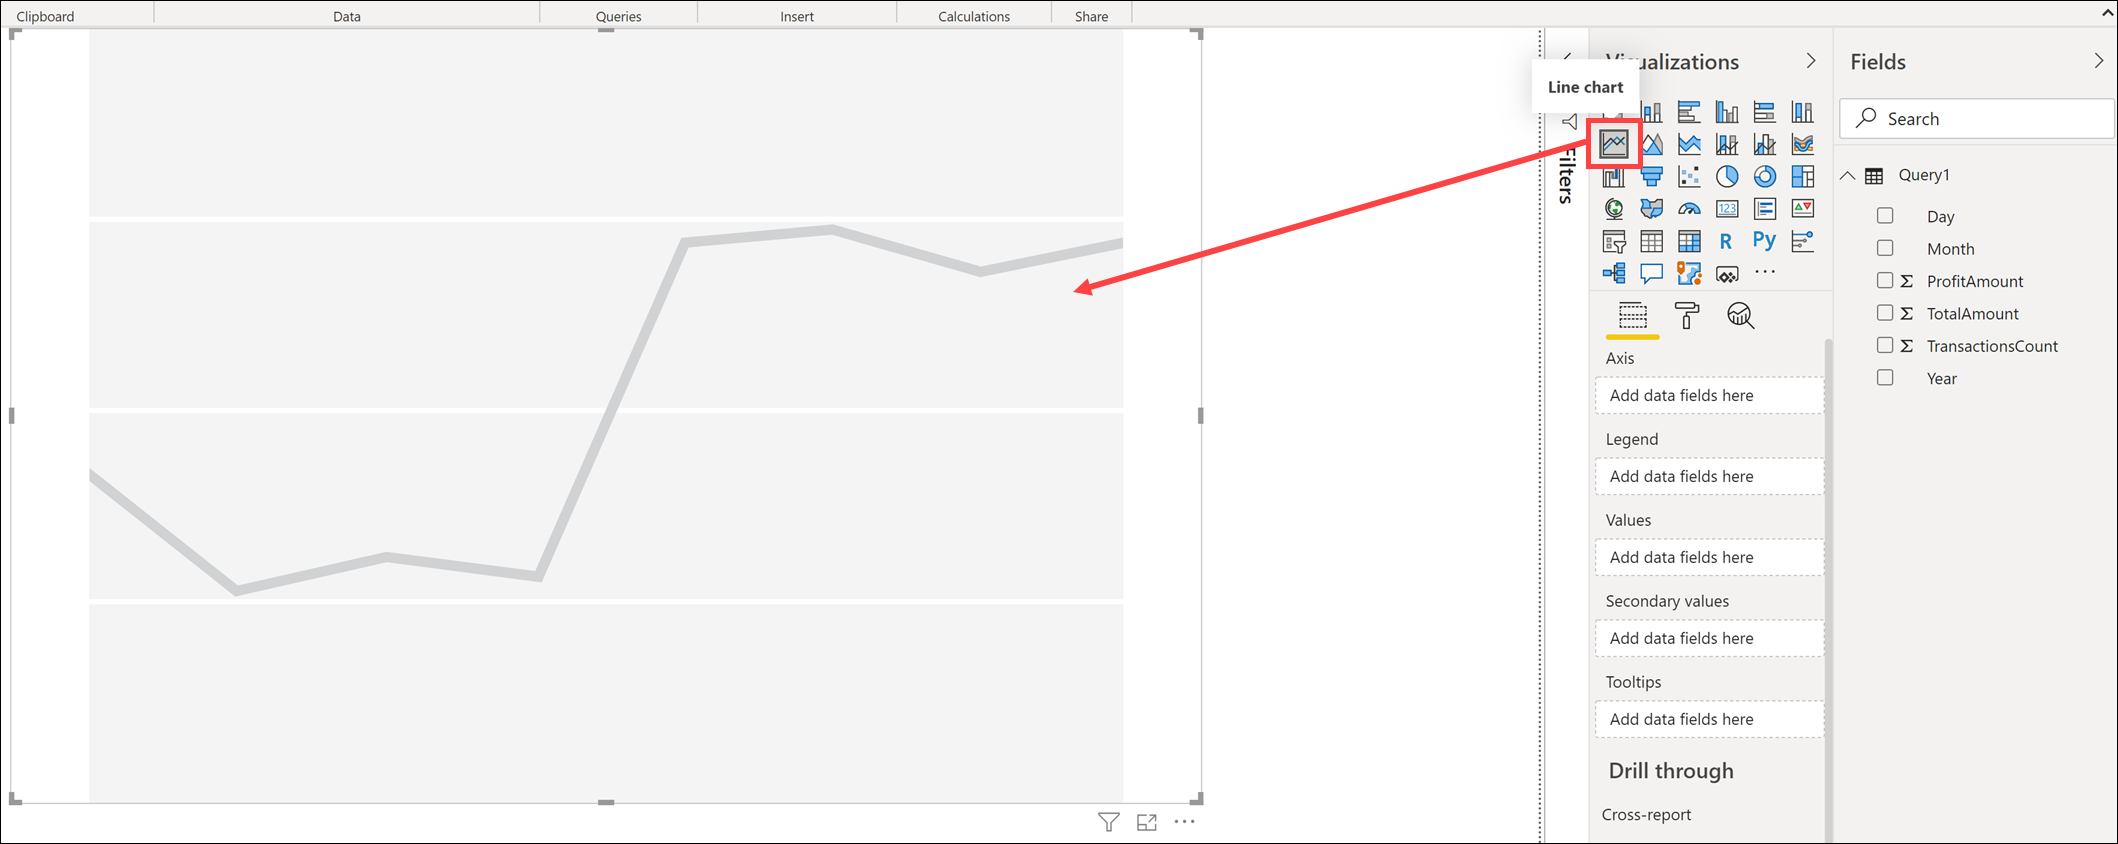 A new line chart is added to the report canvas.